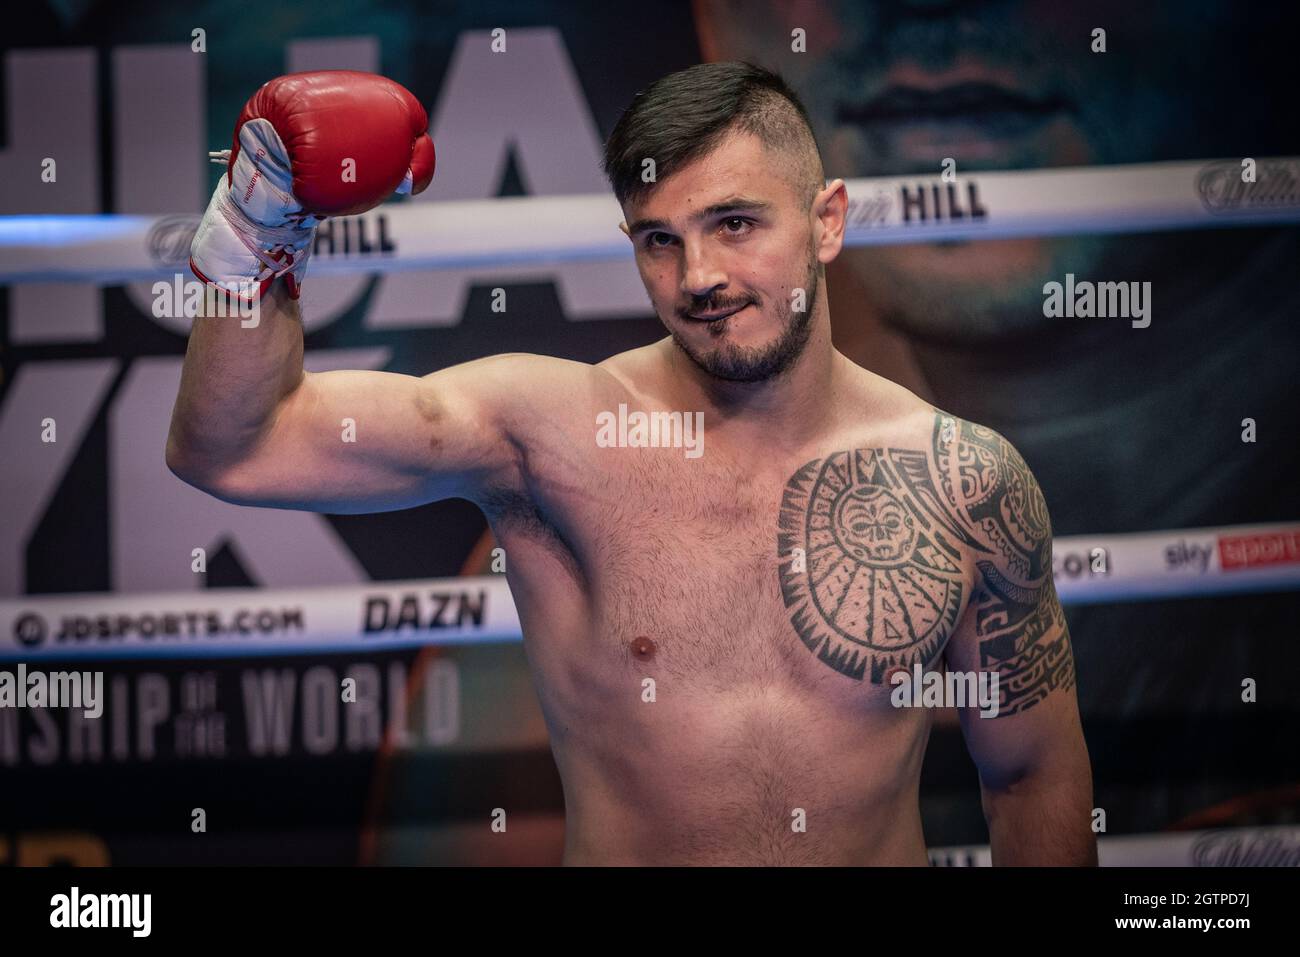 Boxer Dilan Prašović works out for the press at The 02 ahead of Saturday’s match fight to be held at Tottenham Hotspur Stadium. London, UK. Stock Photo